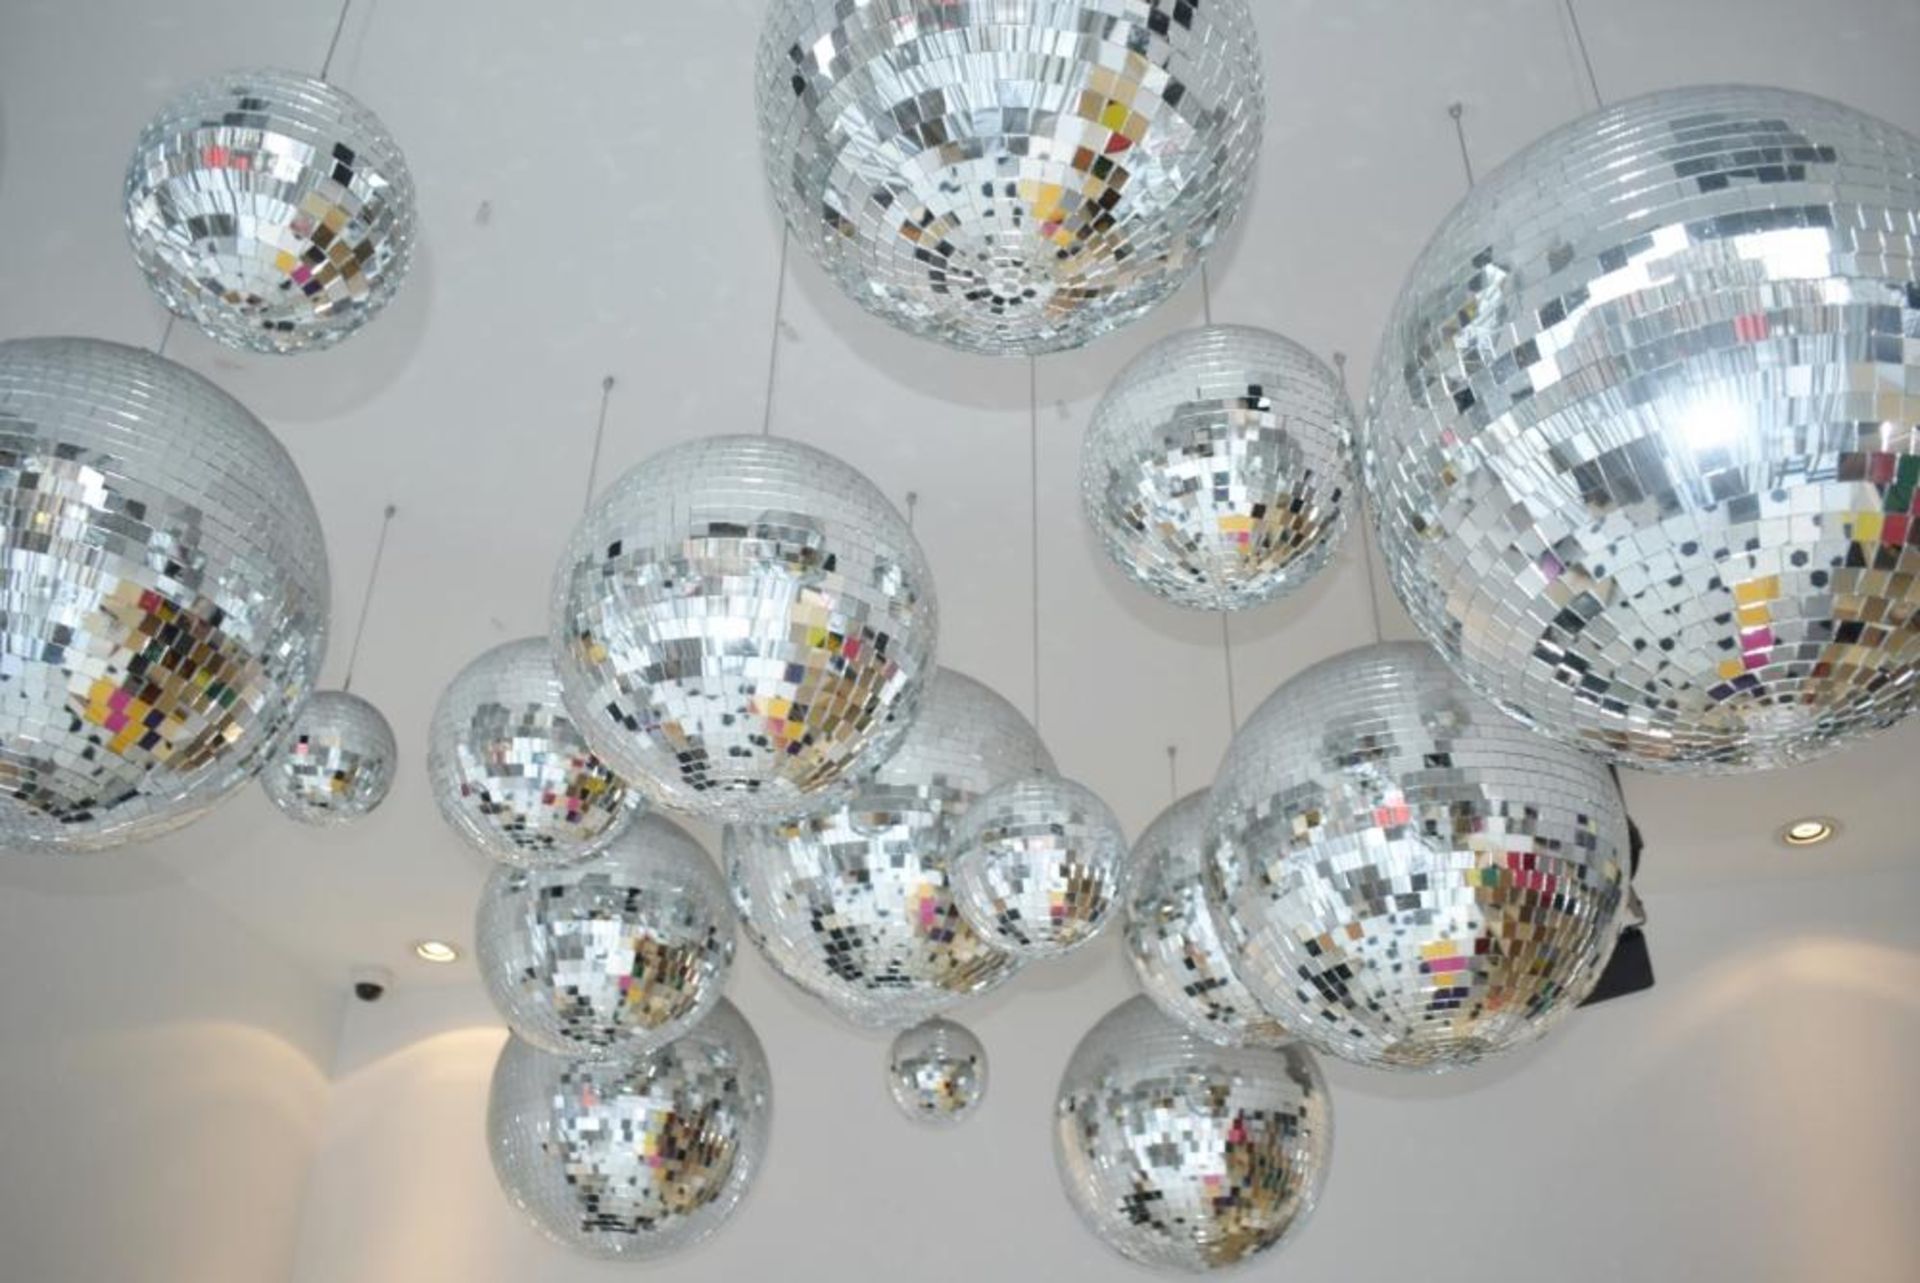 5 x Disco Mirror Glitter Balls - Ceiling Mounted - Will Include Various Sizes From Small to Large -